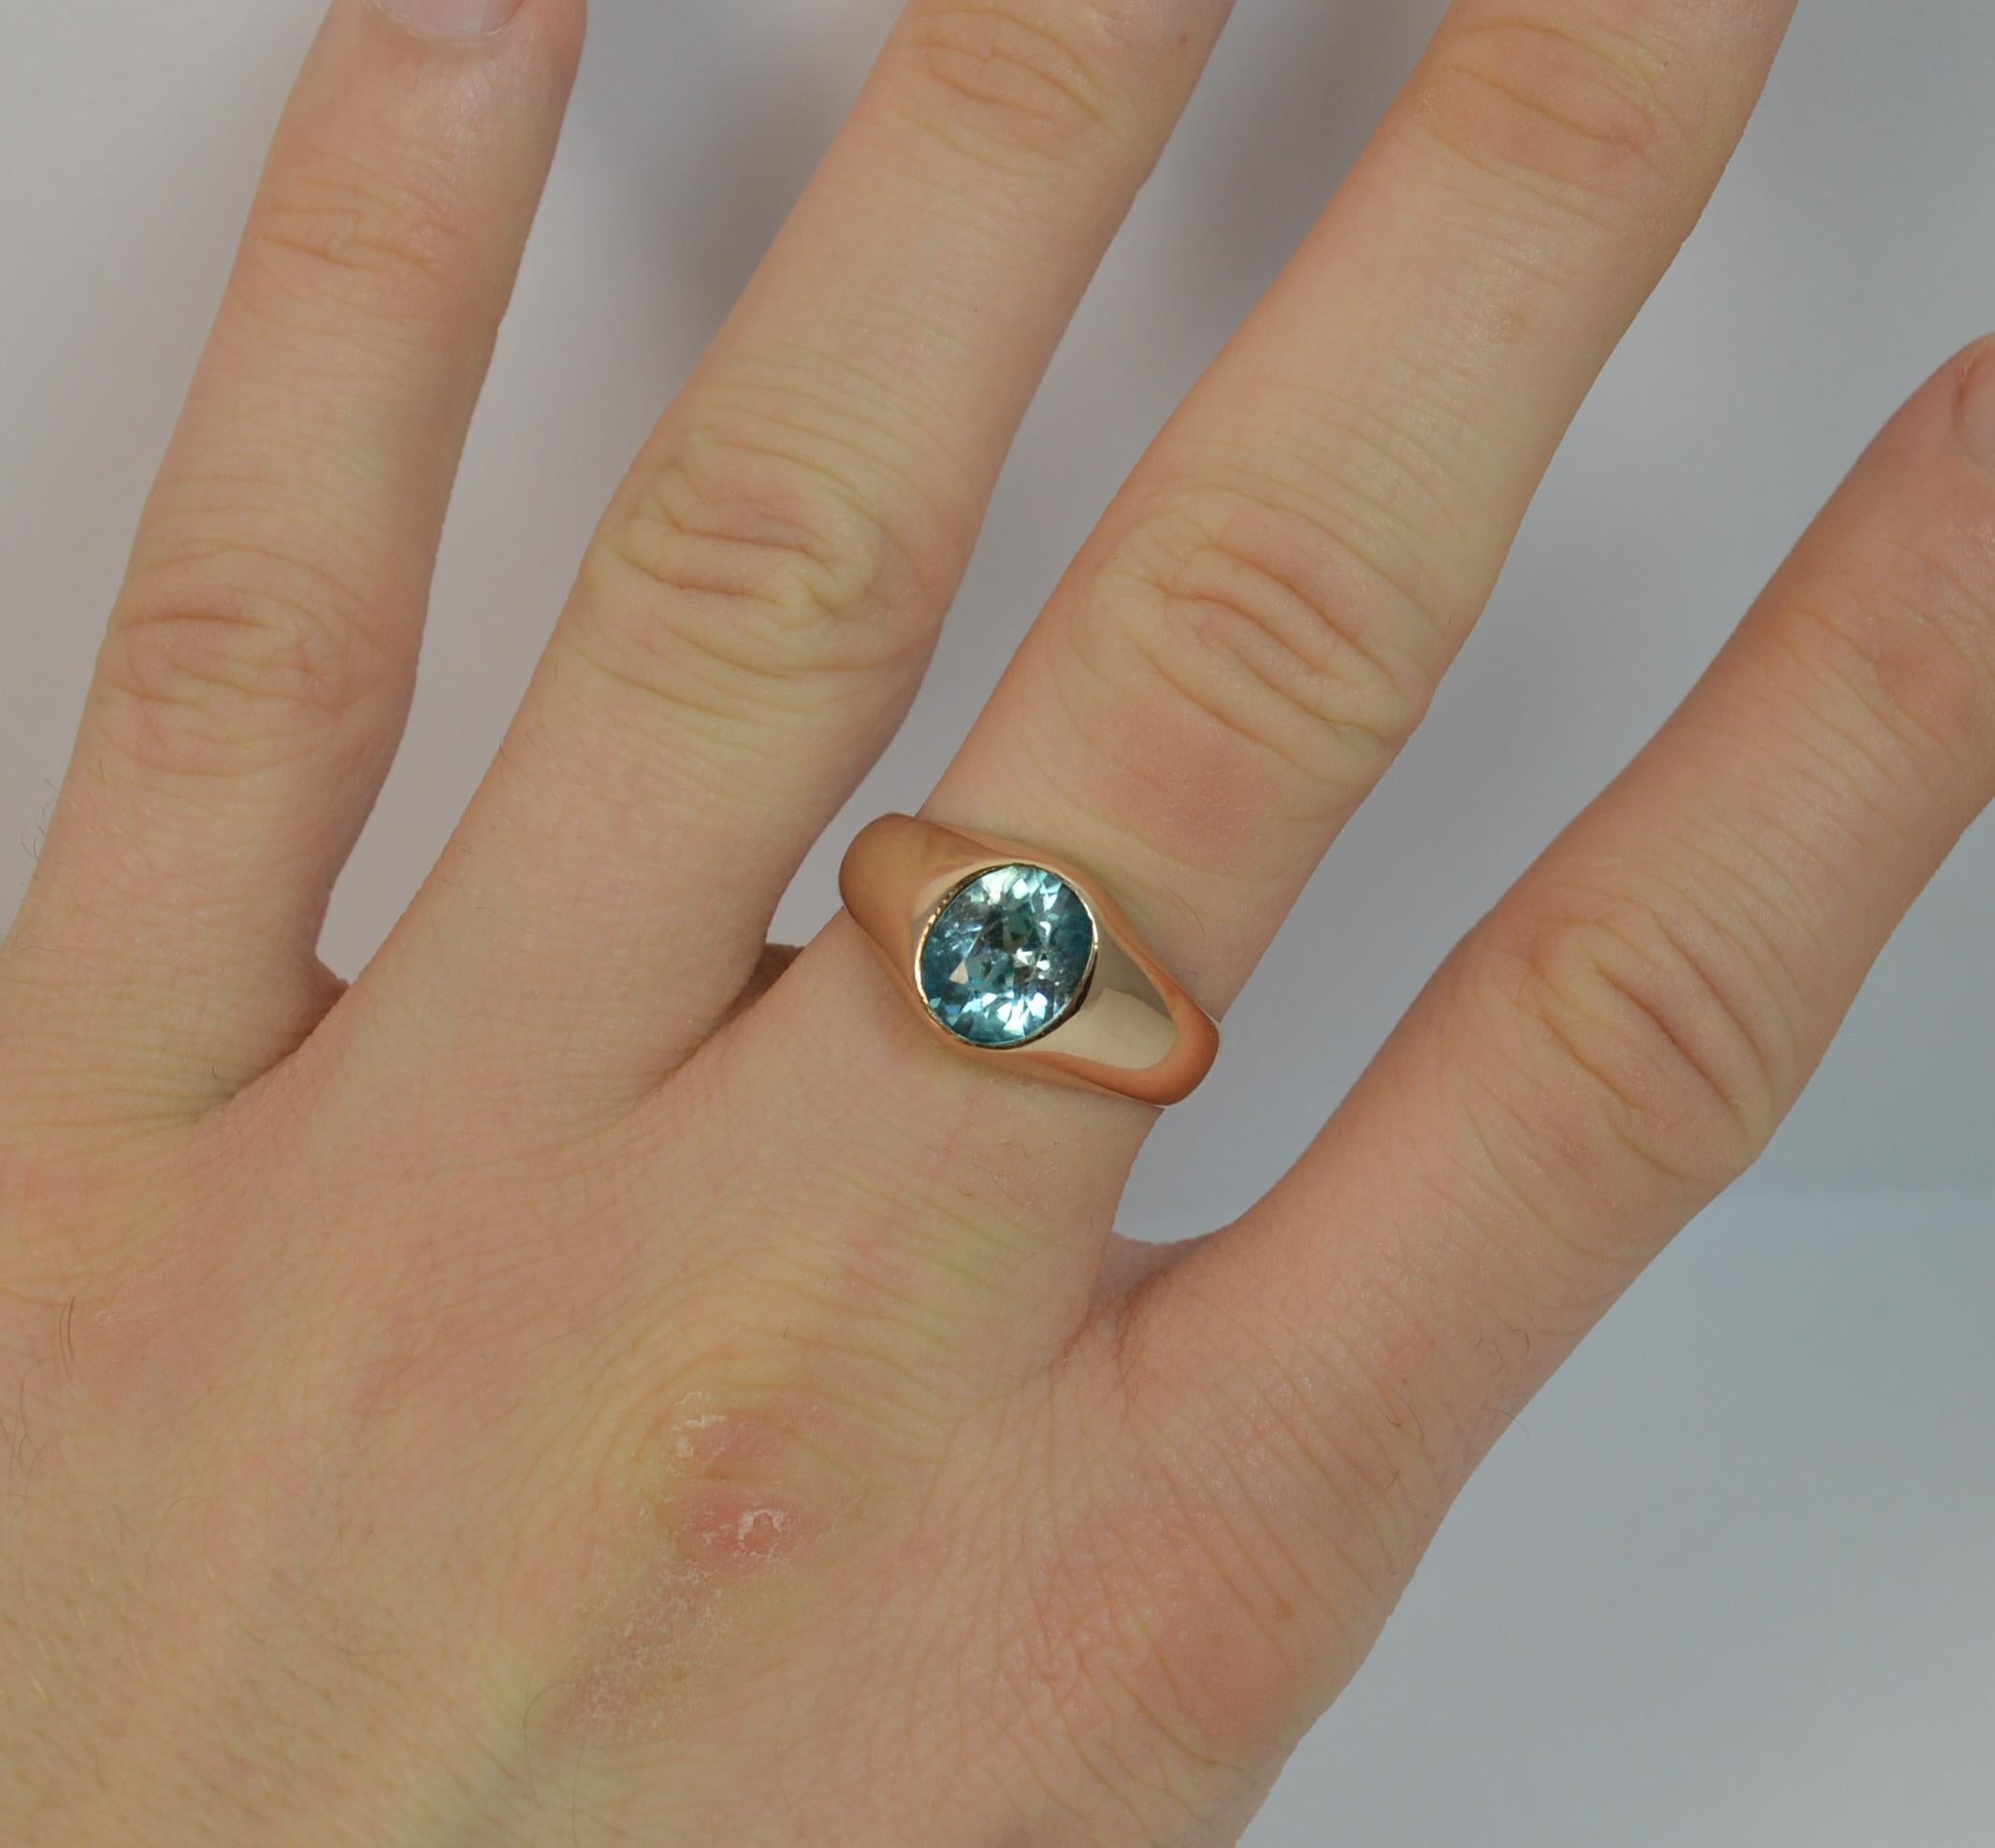 A superb and stylish ladies ring circa 1900.
SIZE ; P 1/2 UK, 7 3/4 US
Modelled in 9 carat rose gold throughout.

Designed with a single large blue zircon in bezel setting. 7.3mm x 9.1mm natural stone.

CONDITION ; Good for age. Solid band, issue